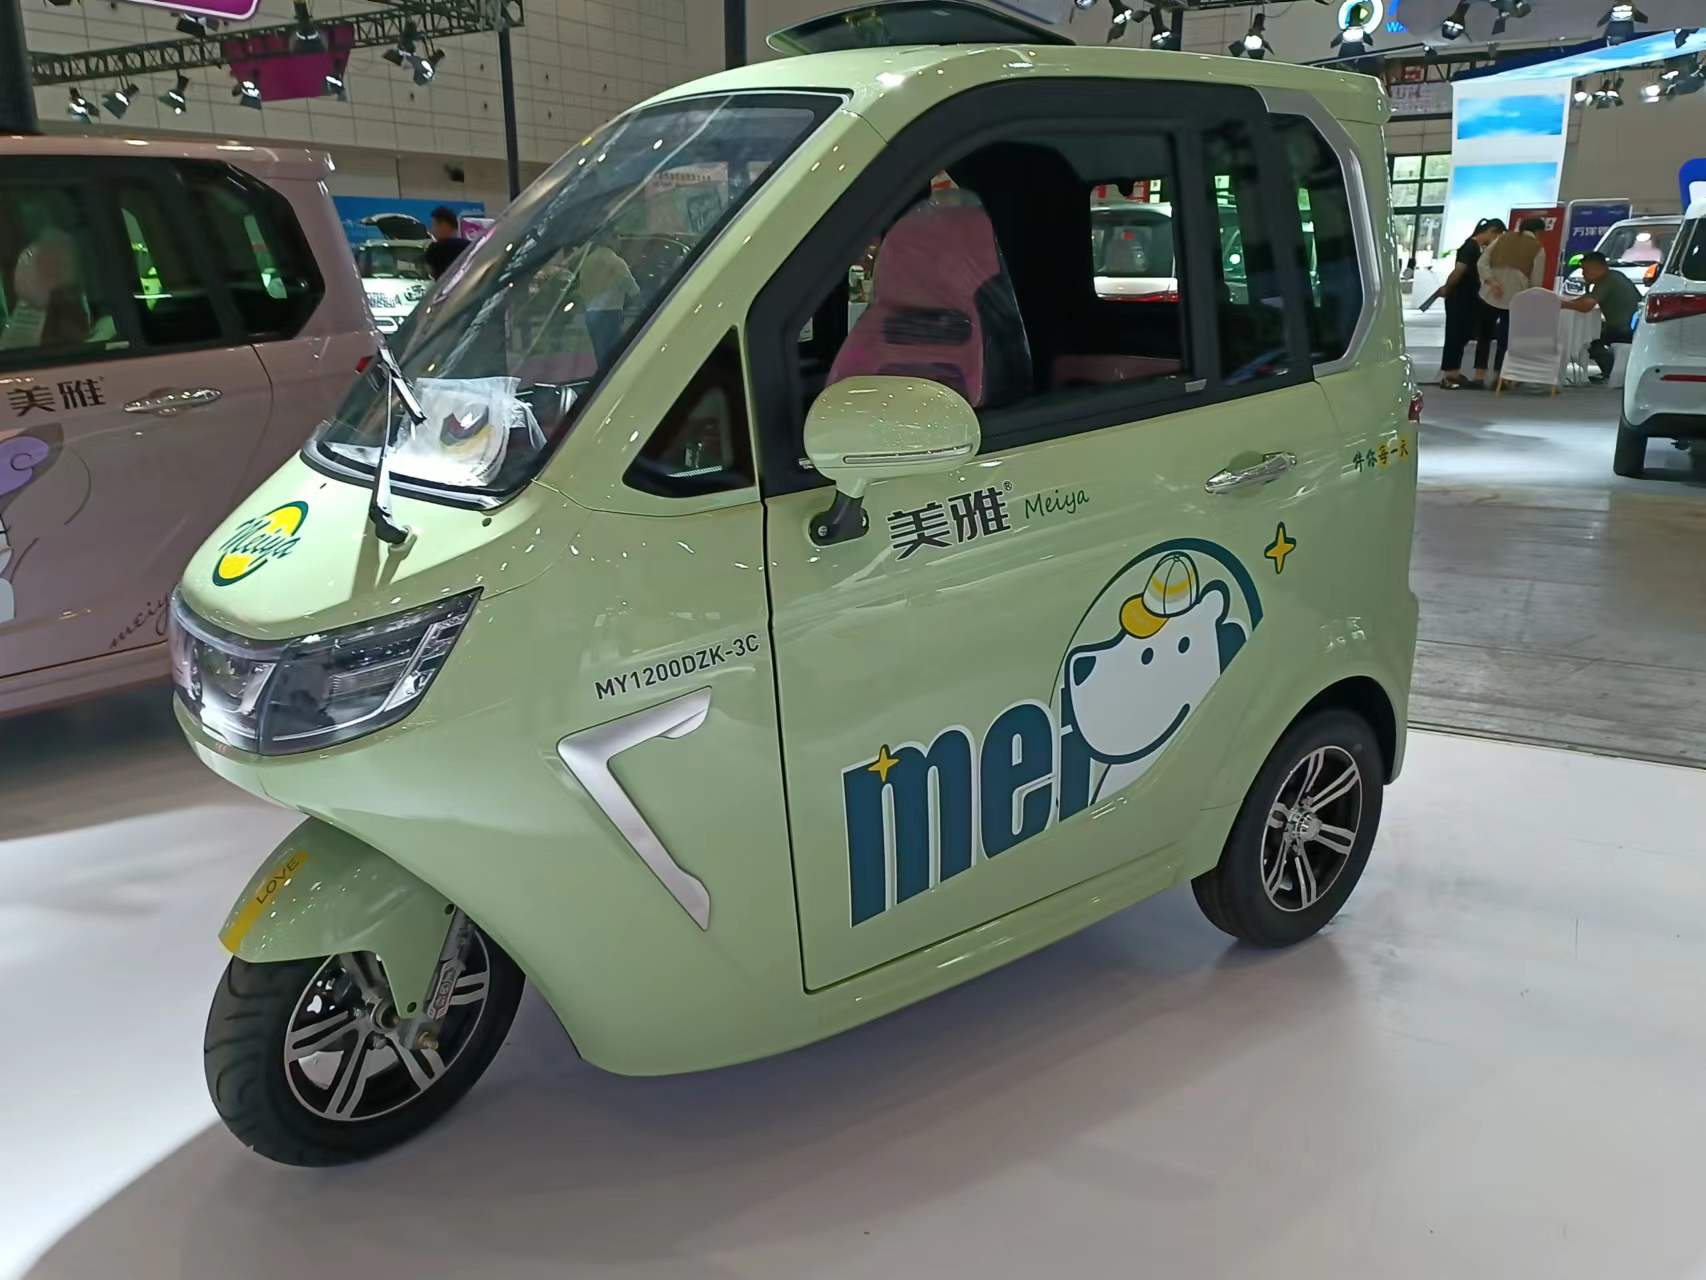 The new three-wheel fully enclosed electric vehicle carries three people